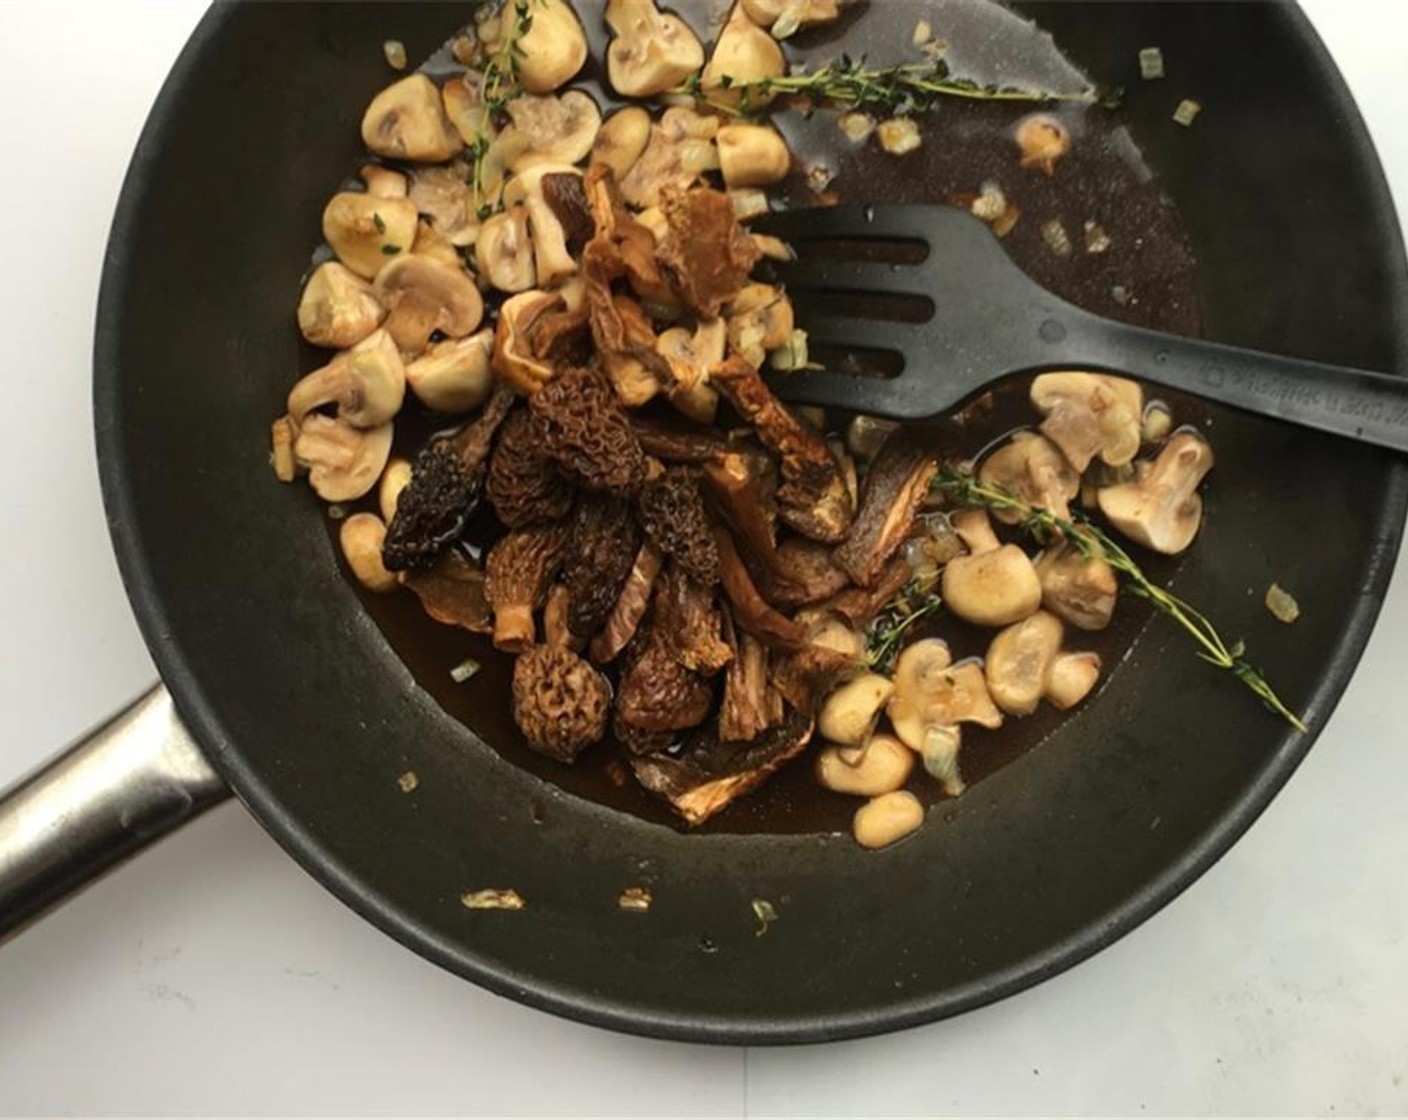 step 4 Stir the mushrooms and onion and fry them for 3 minutes. Then add the soaked mushrooms, the soaking liquid and the Dry White Wine (1/4 cup).